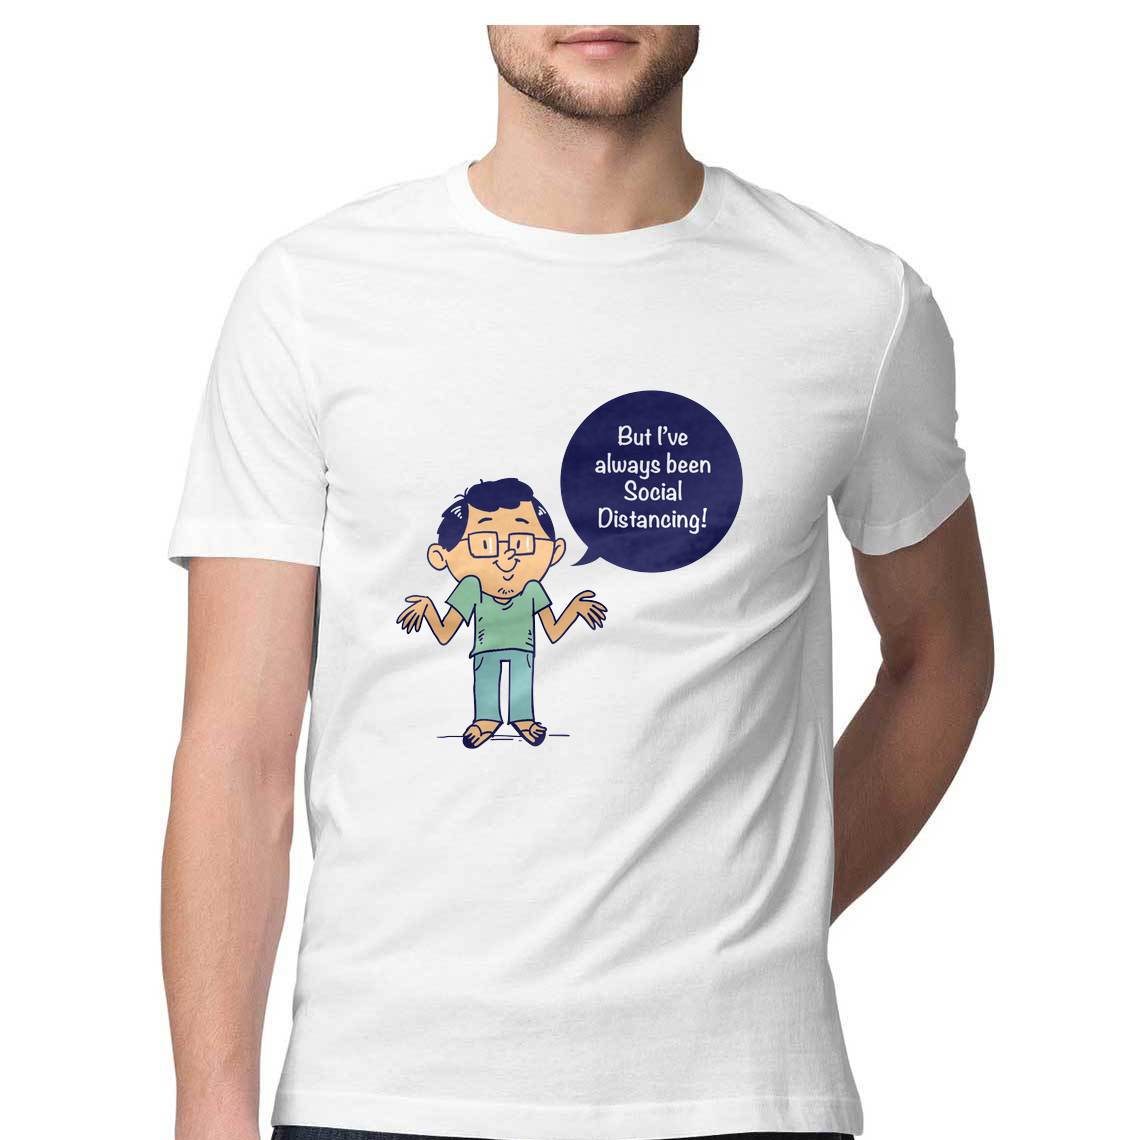 Social distancing t shirt for men with message on staying safe. – simply  urself